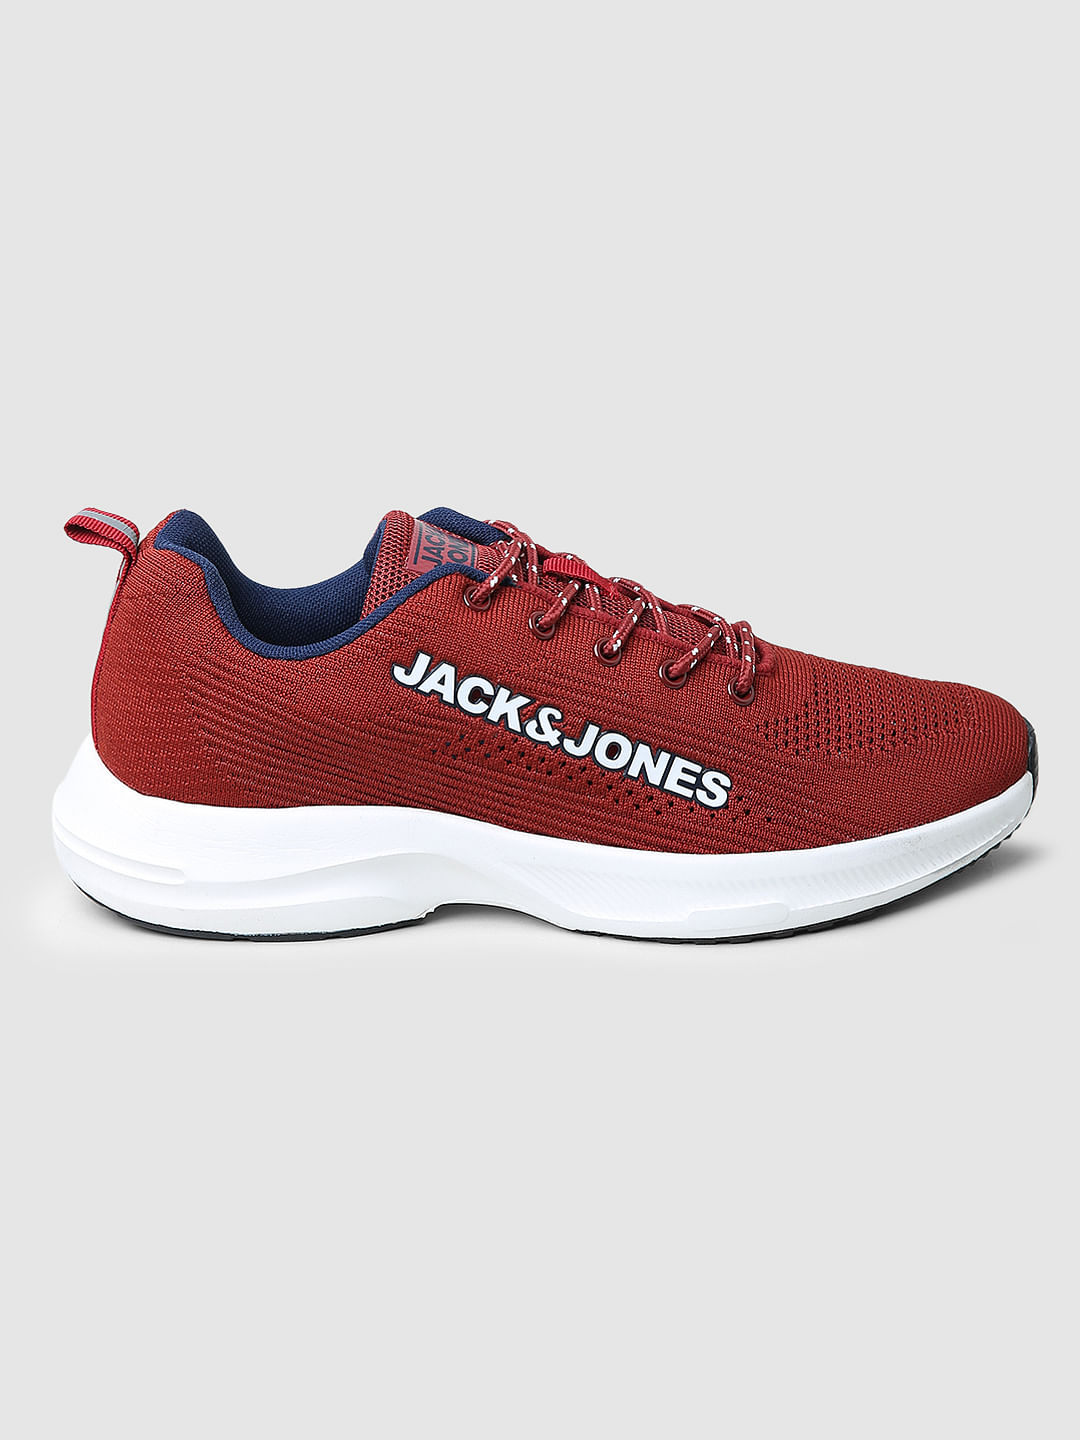 Red Colour Stylish Running Sports Shoes for Men. | Running sport shoes,  Sneakers nike, Shoes mens